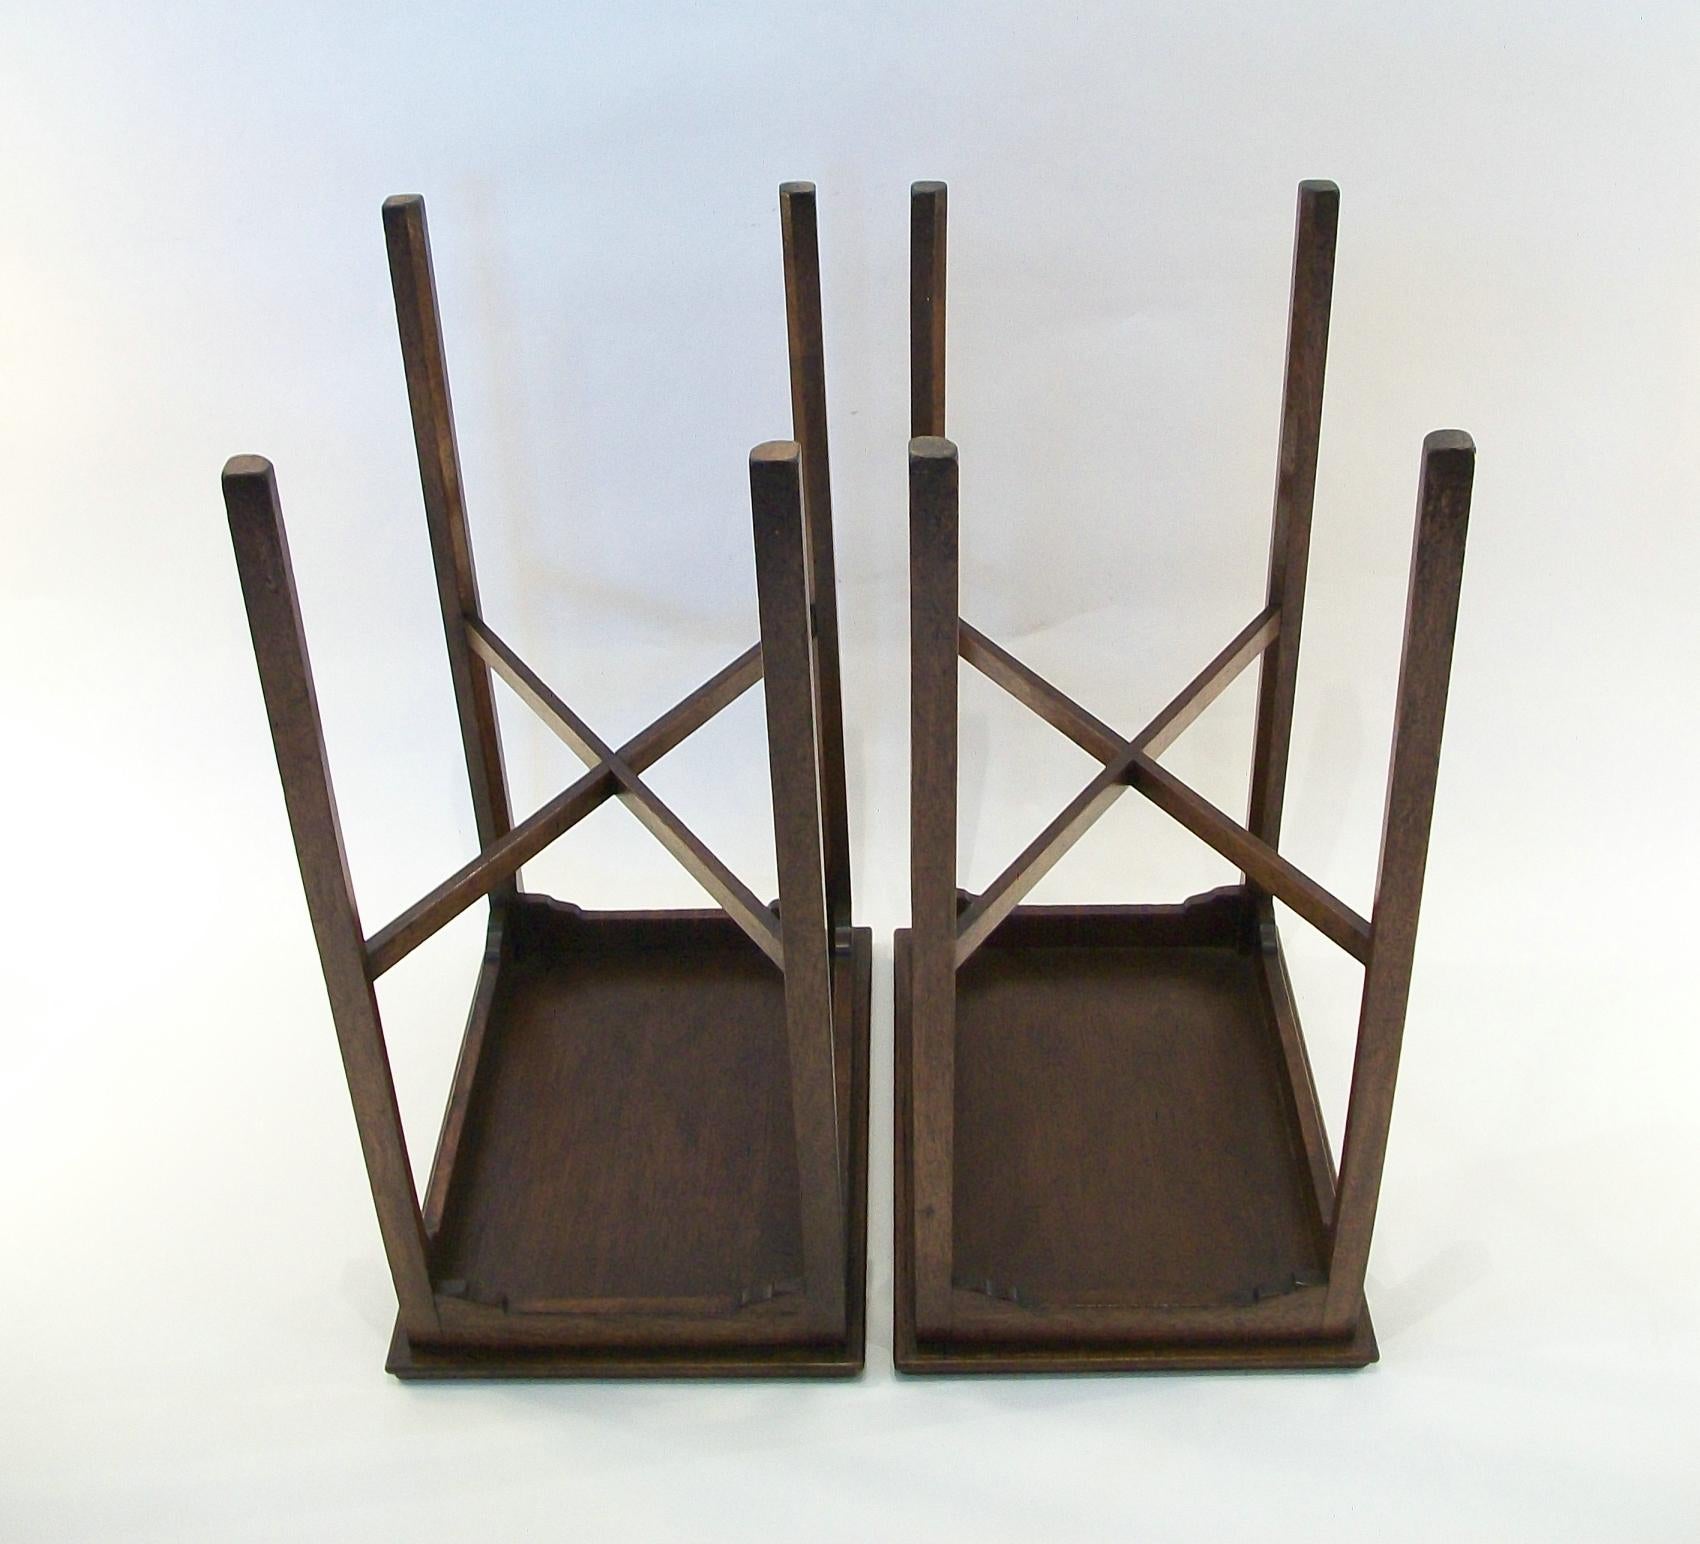 Fine Pair of Georgian Style Flamed Hardwood Side Tables - U.K. - Circa 1950's For Sale 2